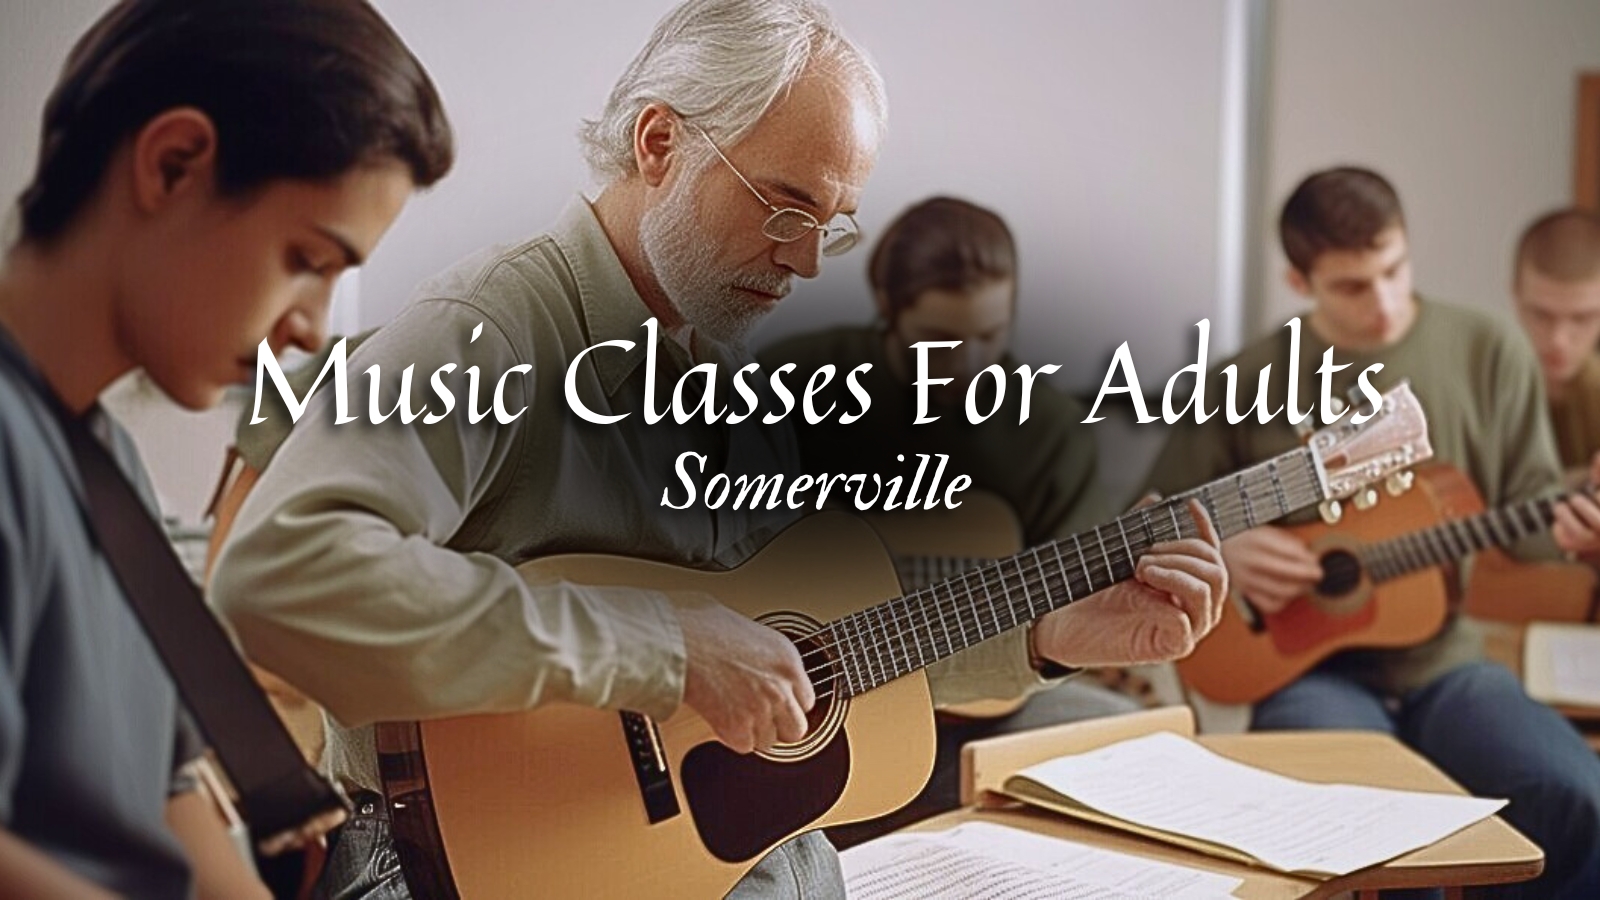 Welcome to Music Classes for Adults in Somerville, Massachusetts